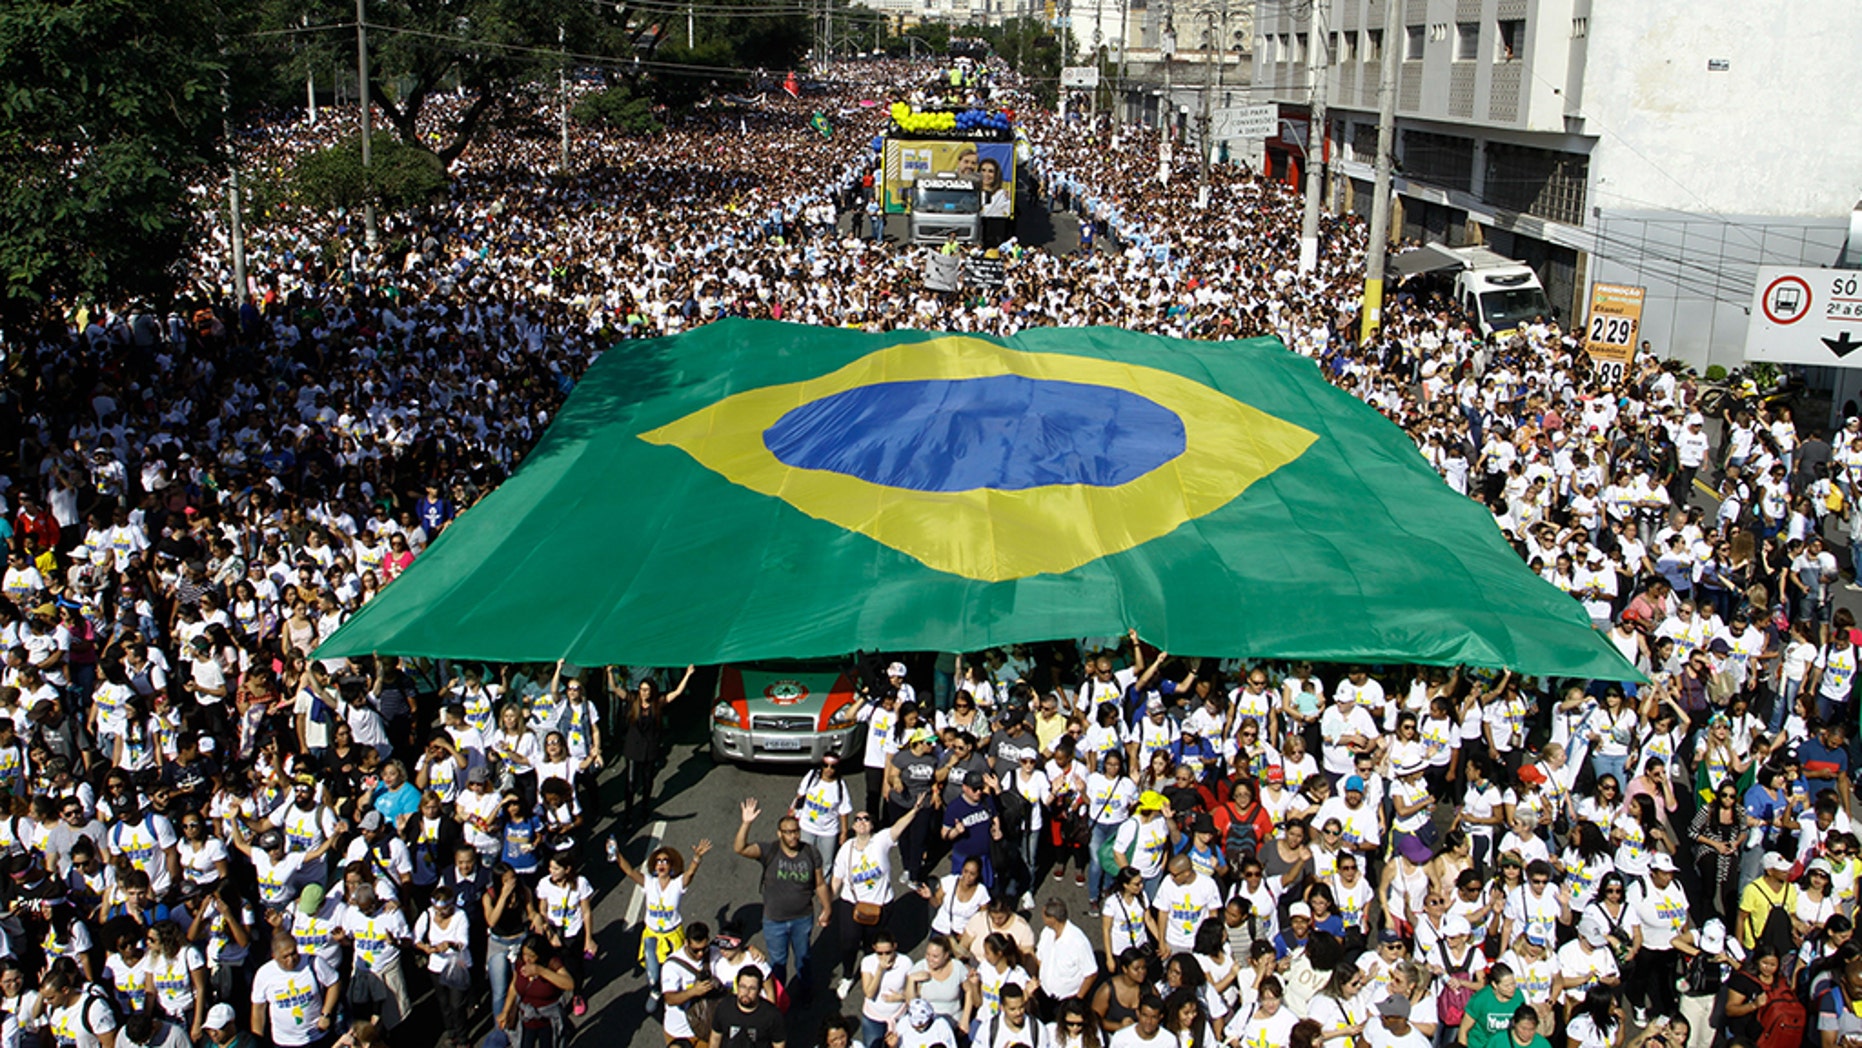 People take part in the 27th edition of March for Jesus, in Sao Paulo, Brazil, on June 20, 2019. "March For Jesus" is the largest evangelical event in Brazil. (Photo by Fabio Vieira/FotoRua/NurPhoto via Getty Images)